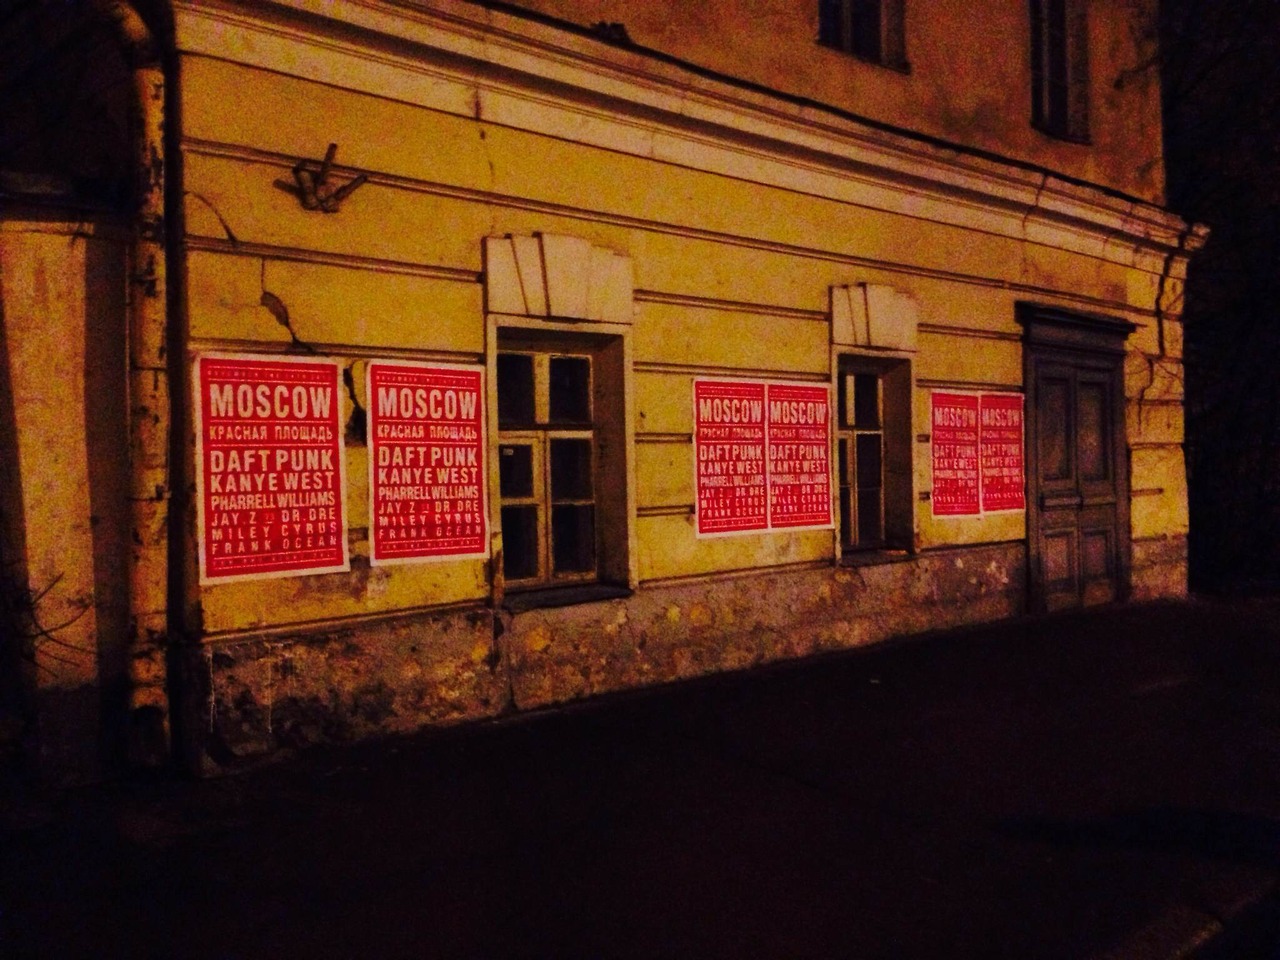 Dream concerts posters in Moscow